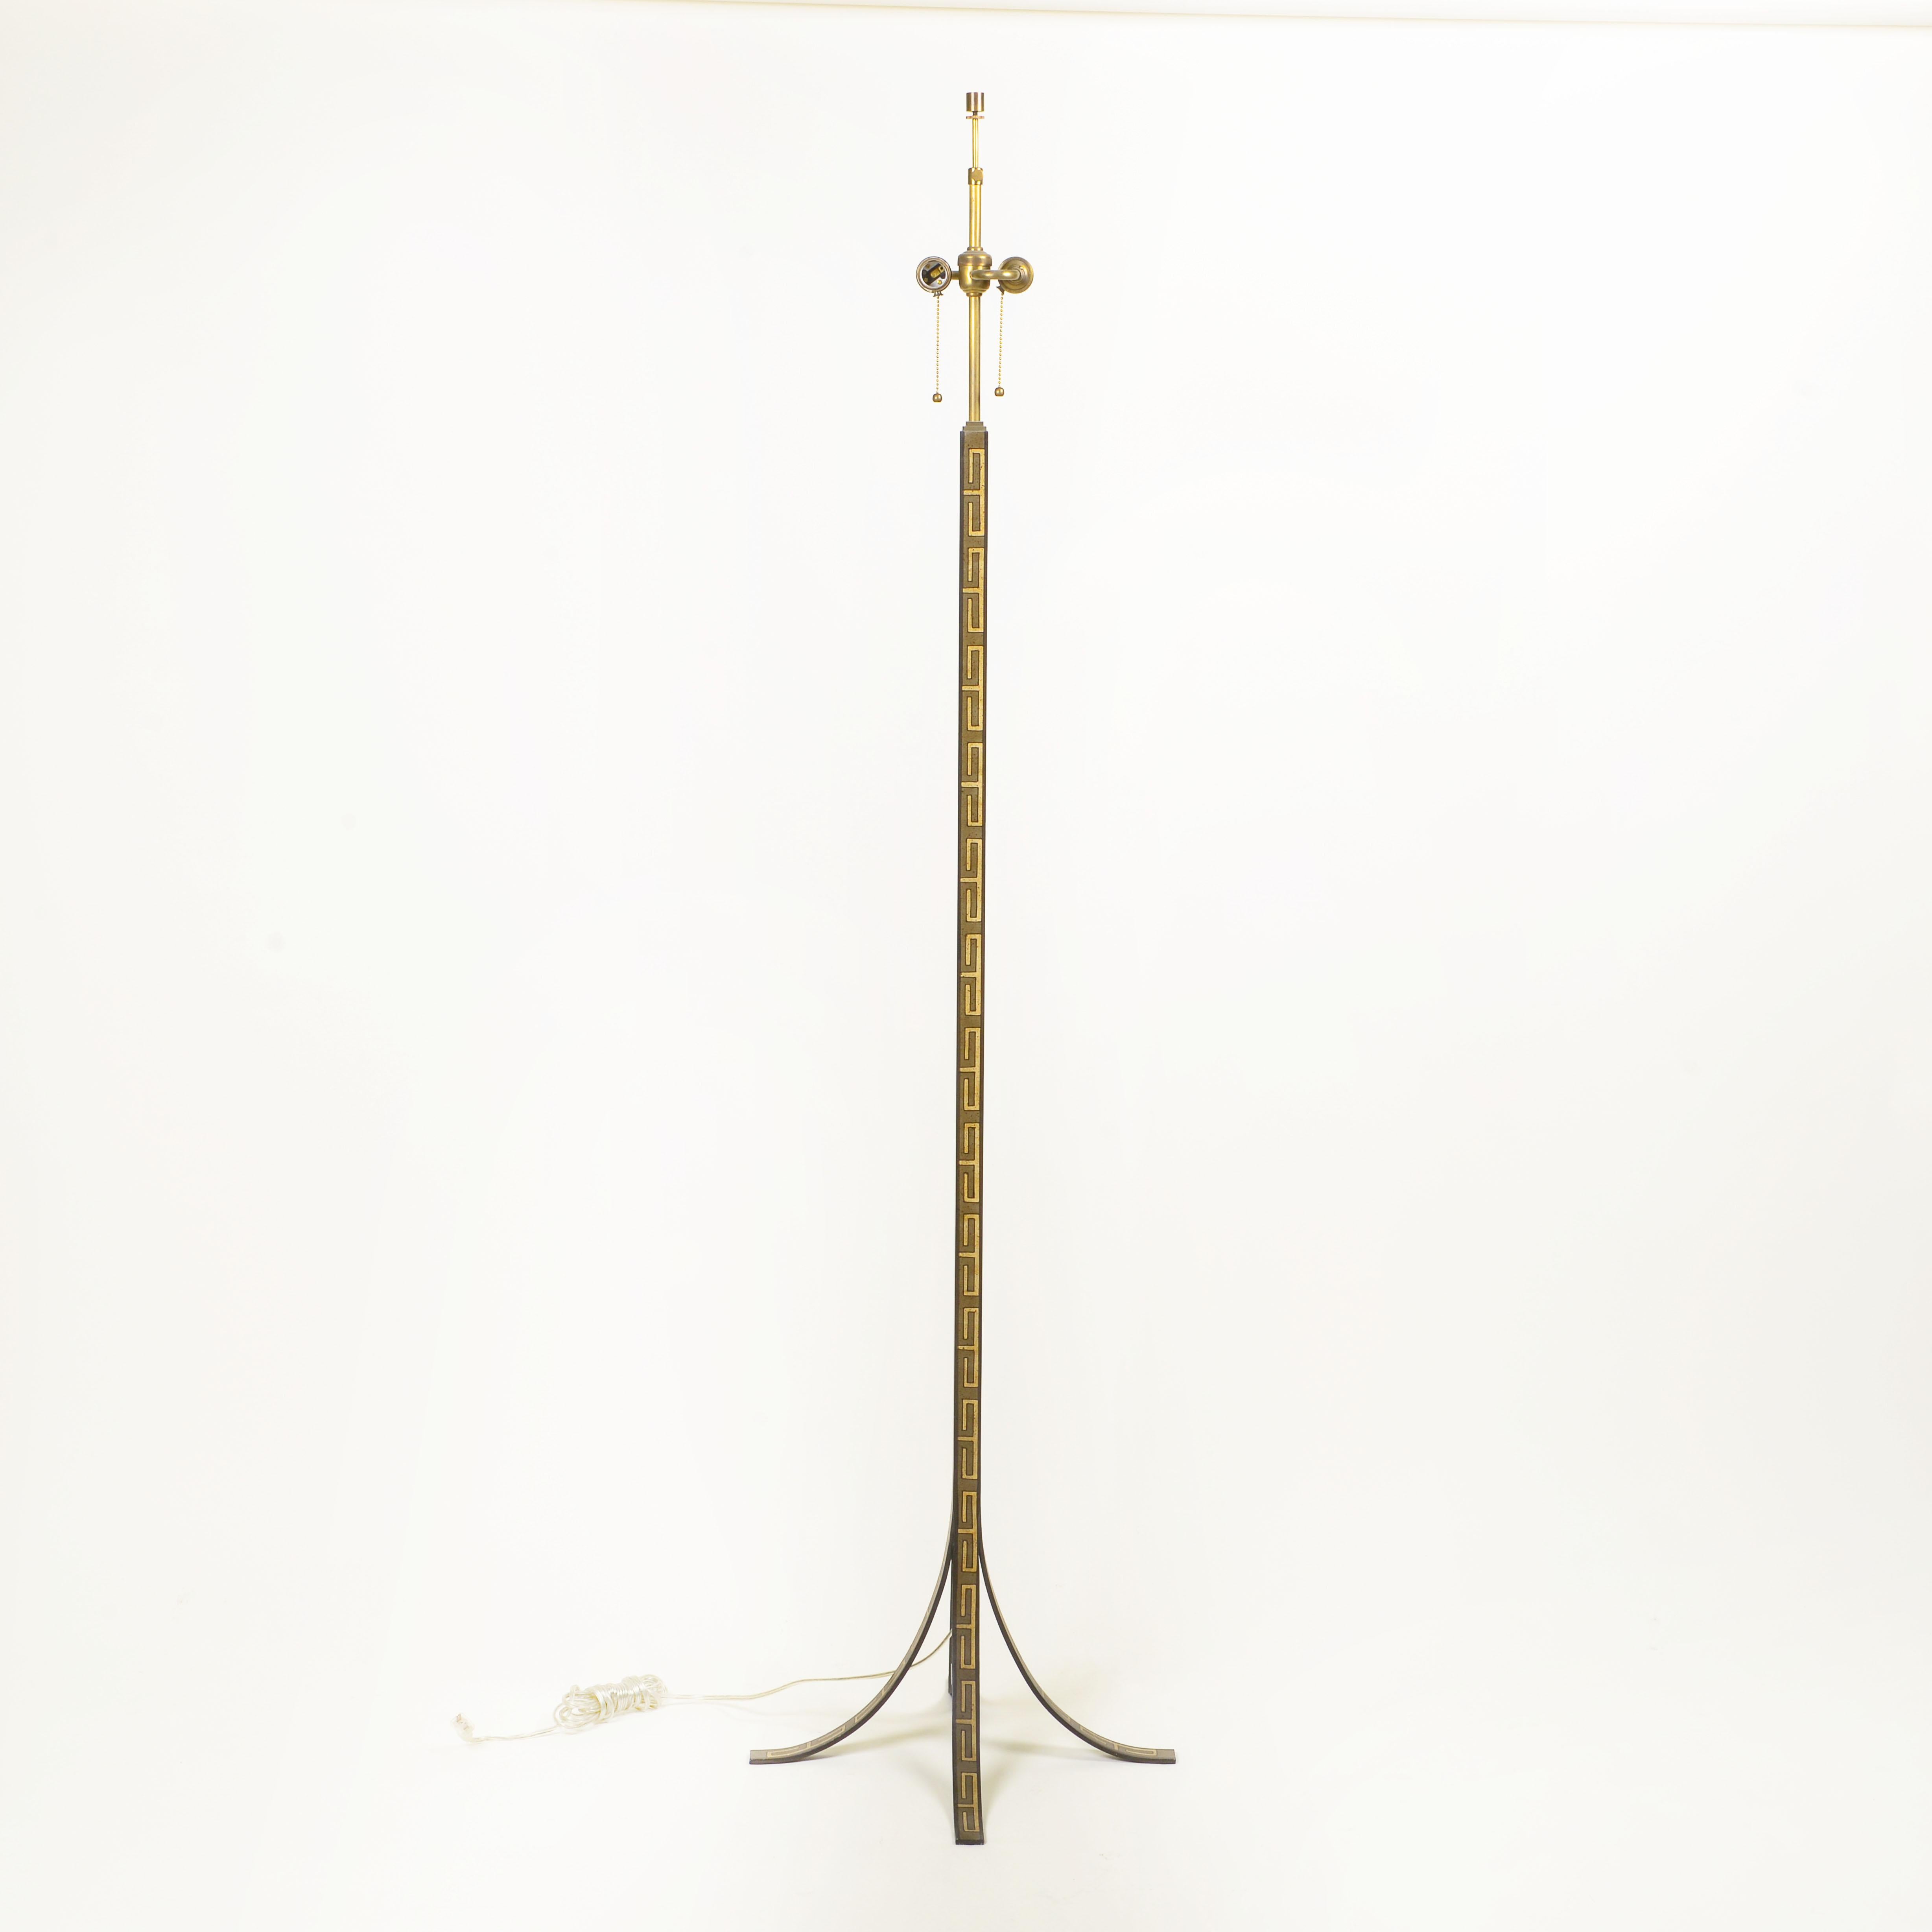 Hand-painted with intricate Greek key decoration, this floor lamp is supported on four downswept feet. With paper drum shade.